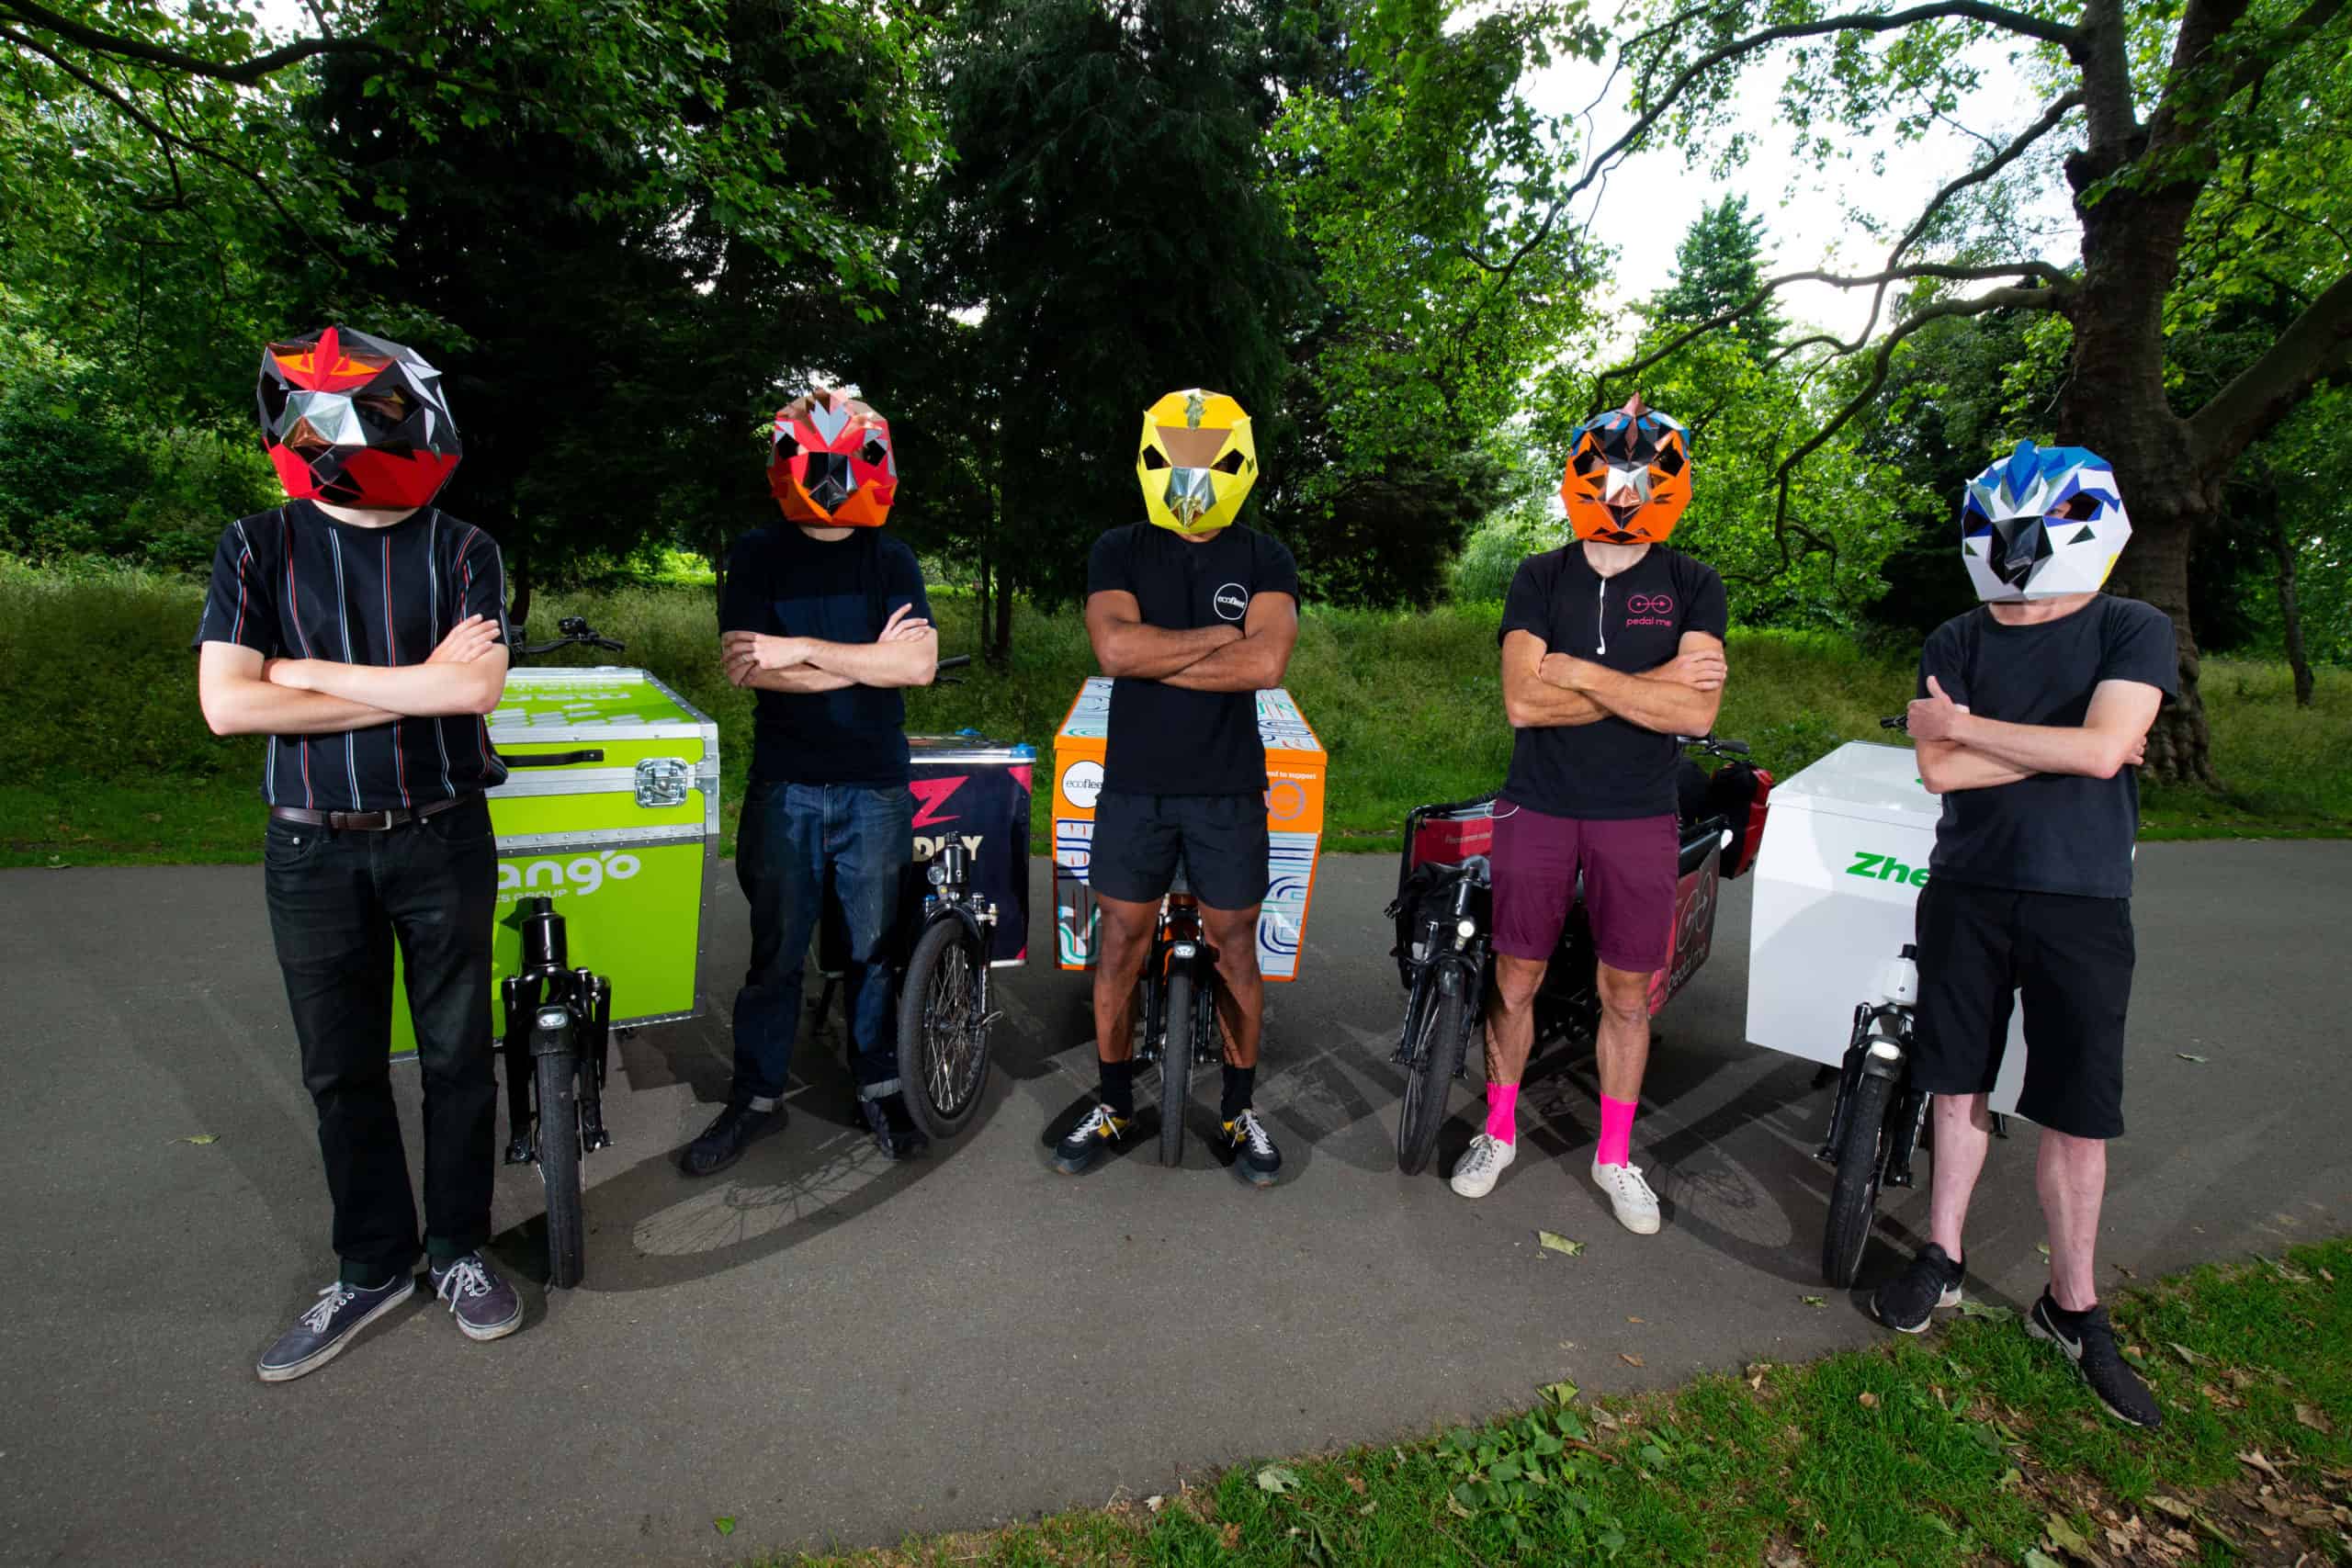 *** FREE FOR EDITORIAL USE ***
Cargo bike riders from across London don birdmasks to launch new Birdsong Bikes scheme and install ‘birdsong radios’ on their bikes to bring the soothing sounds of nature with every delivery’
Riders L-R Jacob Muna (19), Charlie Spicer (28), Tay Bonadie (29), Ben Knowles (39), Joseph Sharp (39)